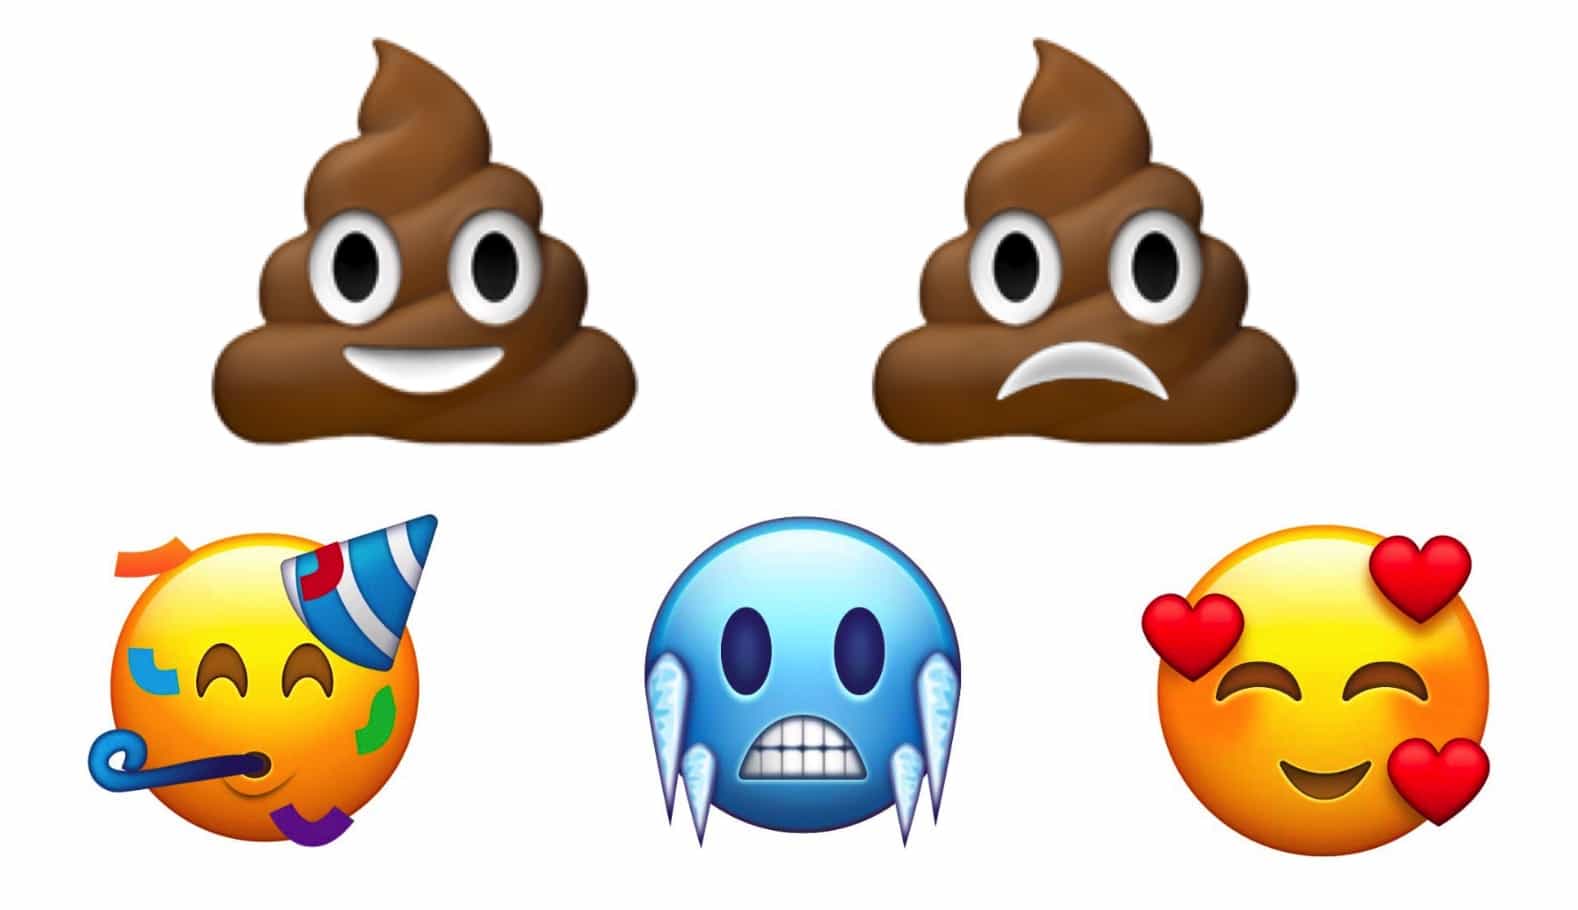 Proposed new emojis for 2018